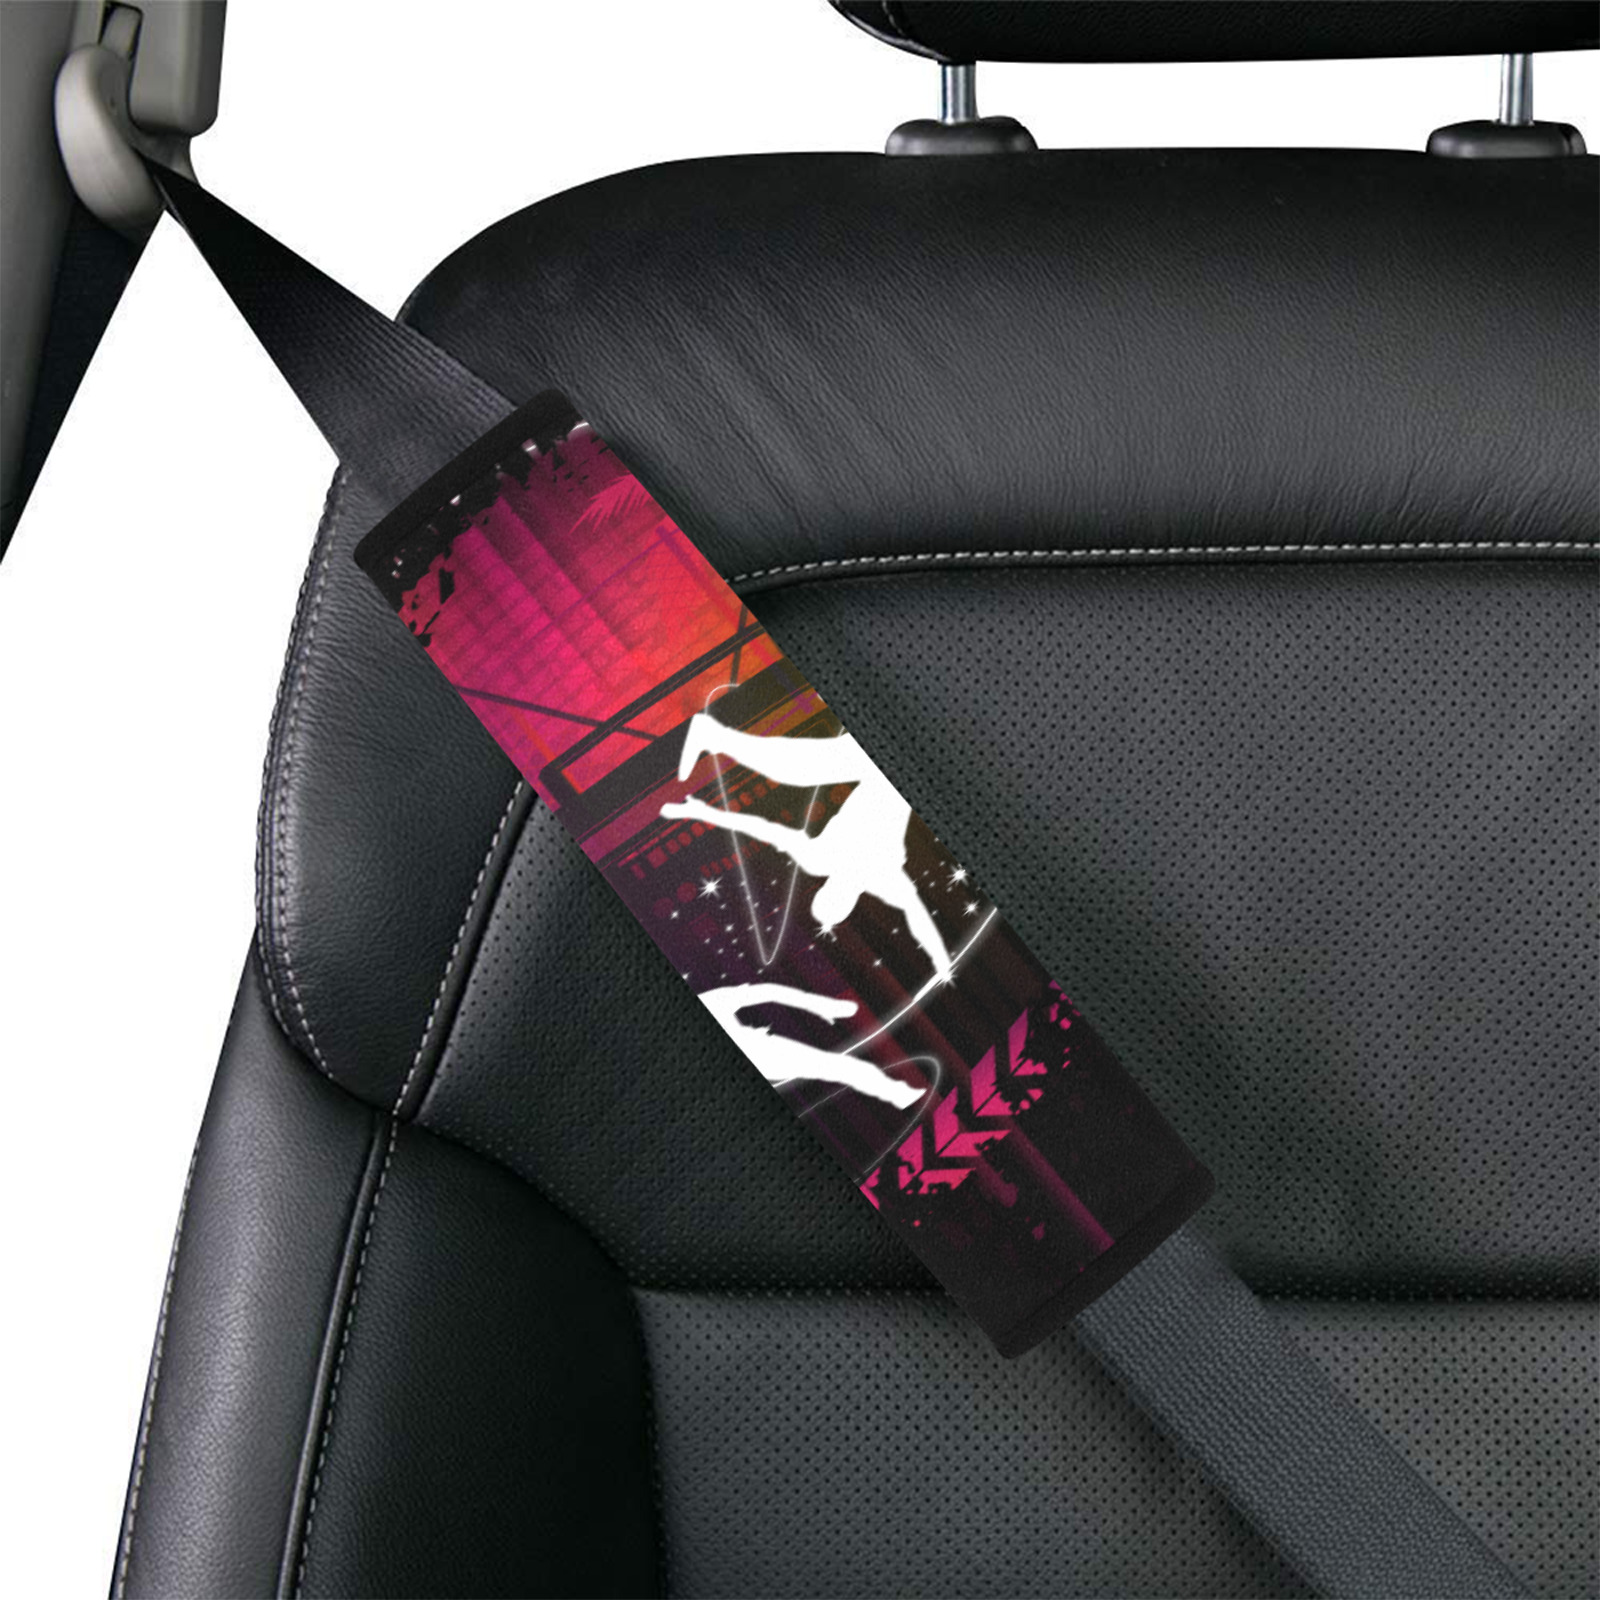 The Breakers Car Seat Belt Cover 7''x10''